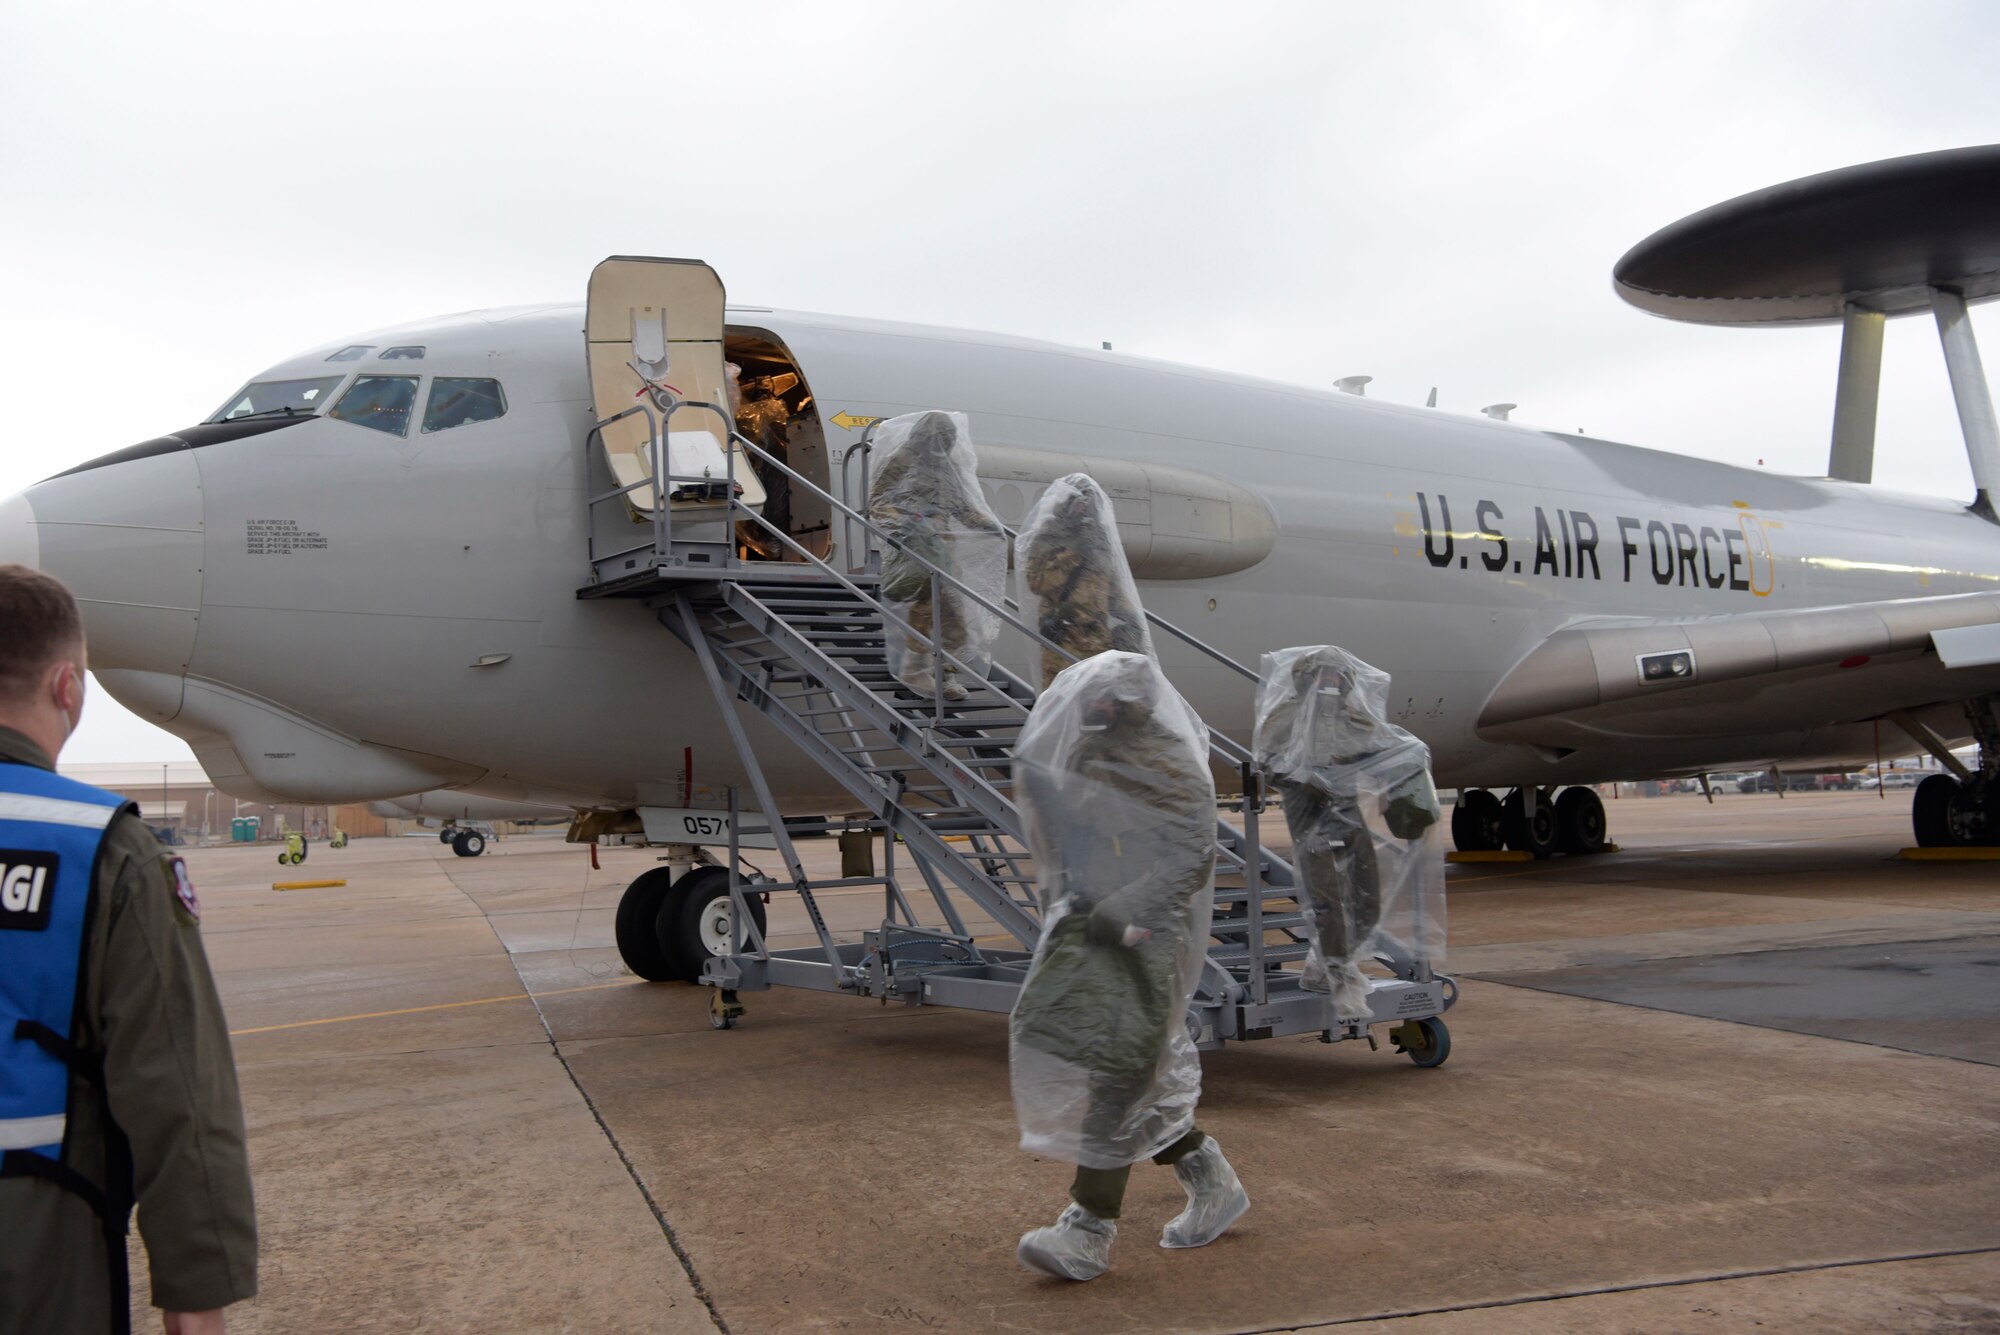 Military members exiting a plane